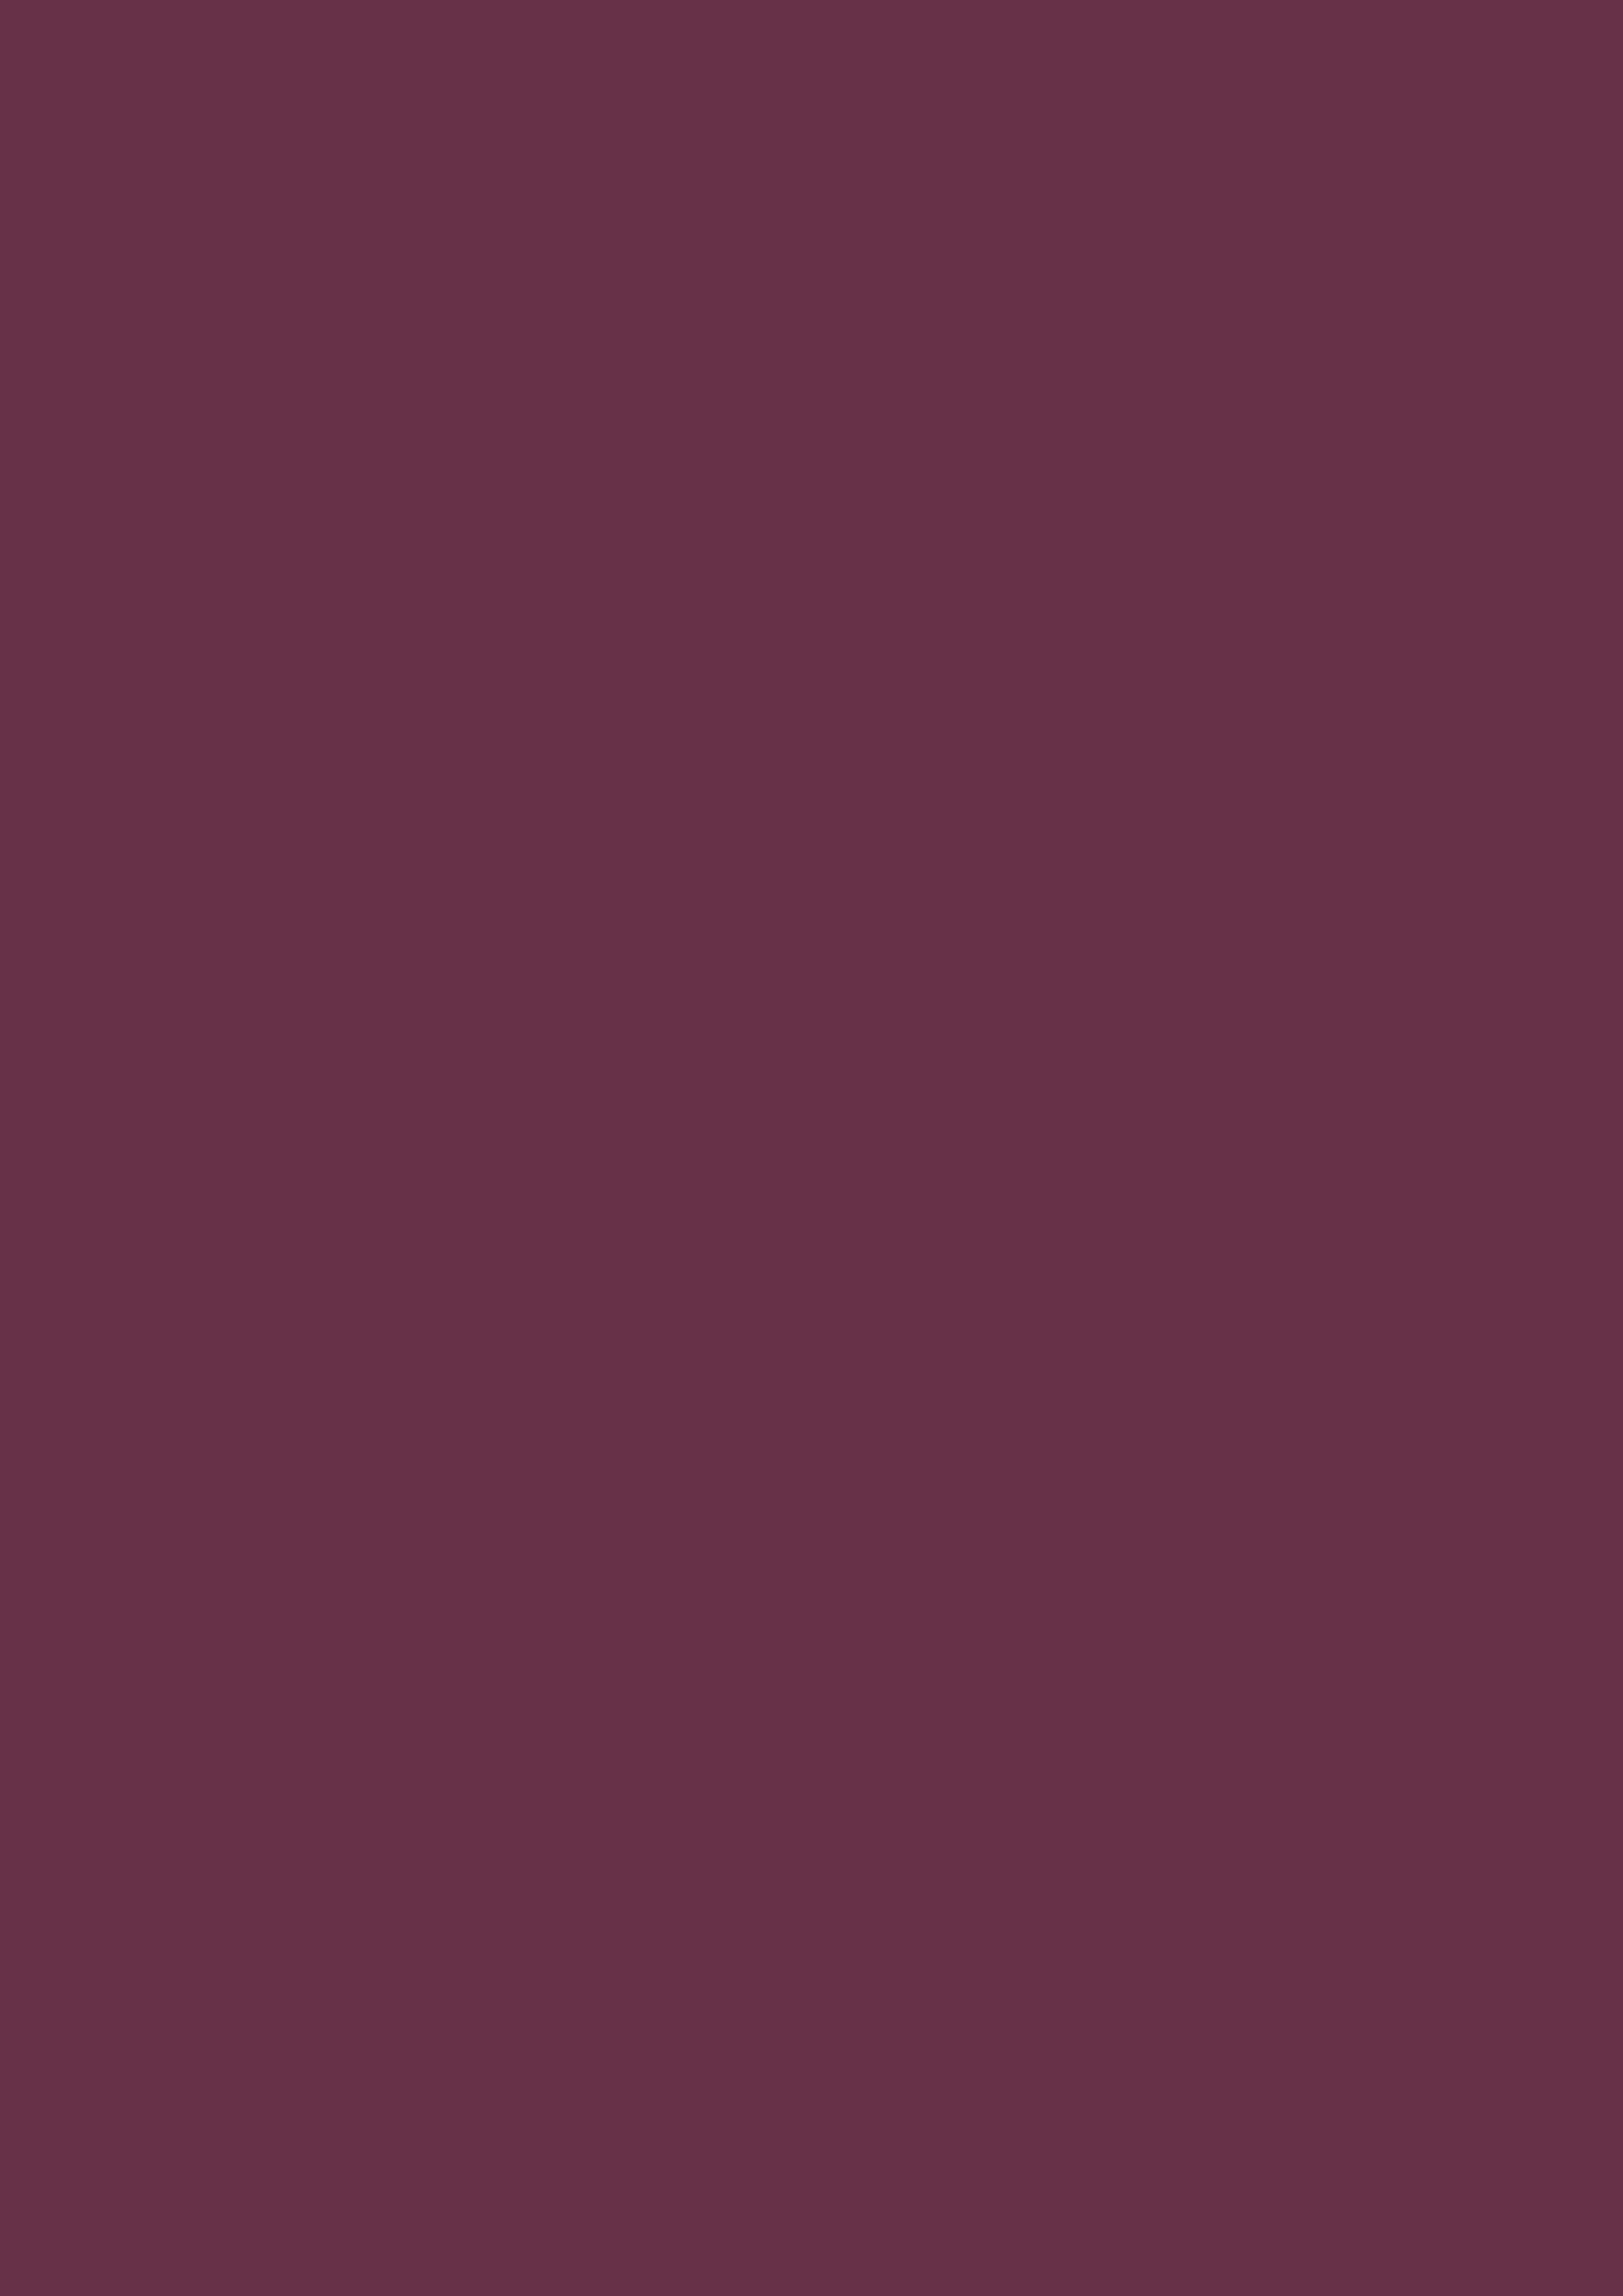 2480x3508 Old Mauve Solid Color Background